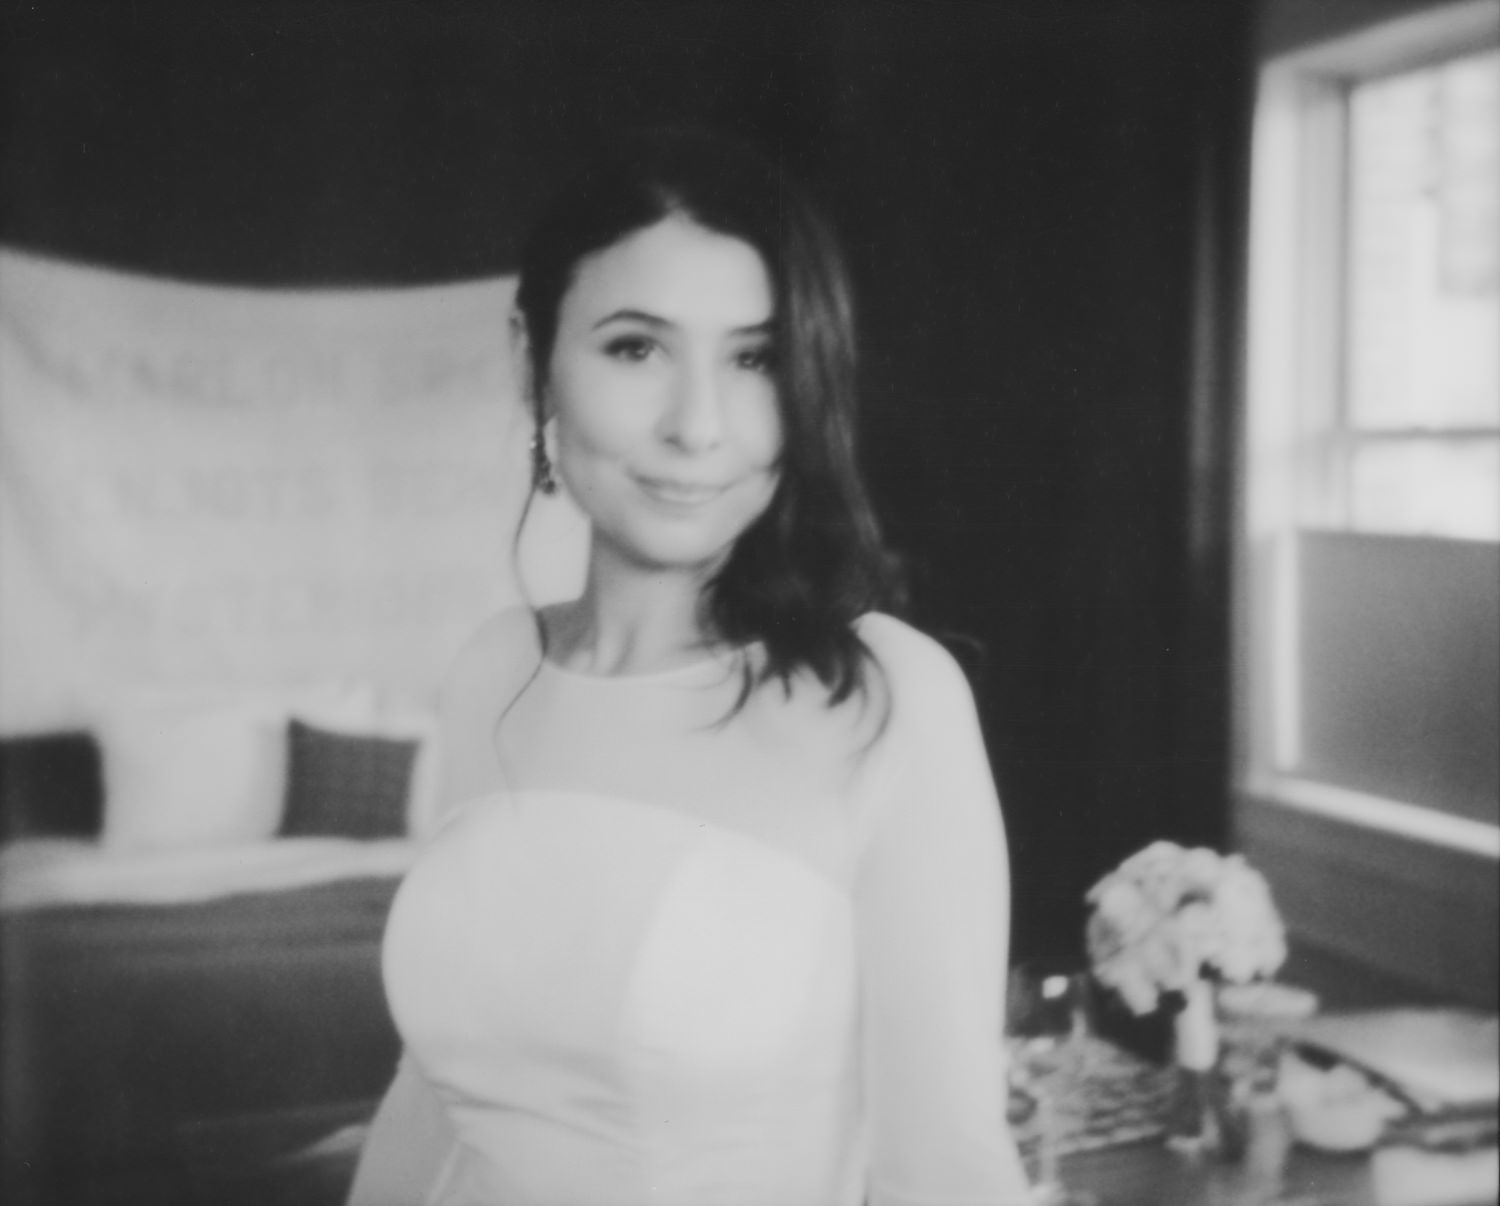 Blurry black and white Polaroid of the bride. by Ace Hotel wedding photographer Briana Morrison